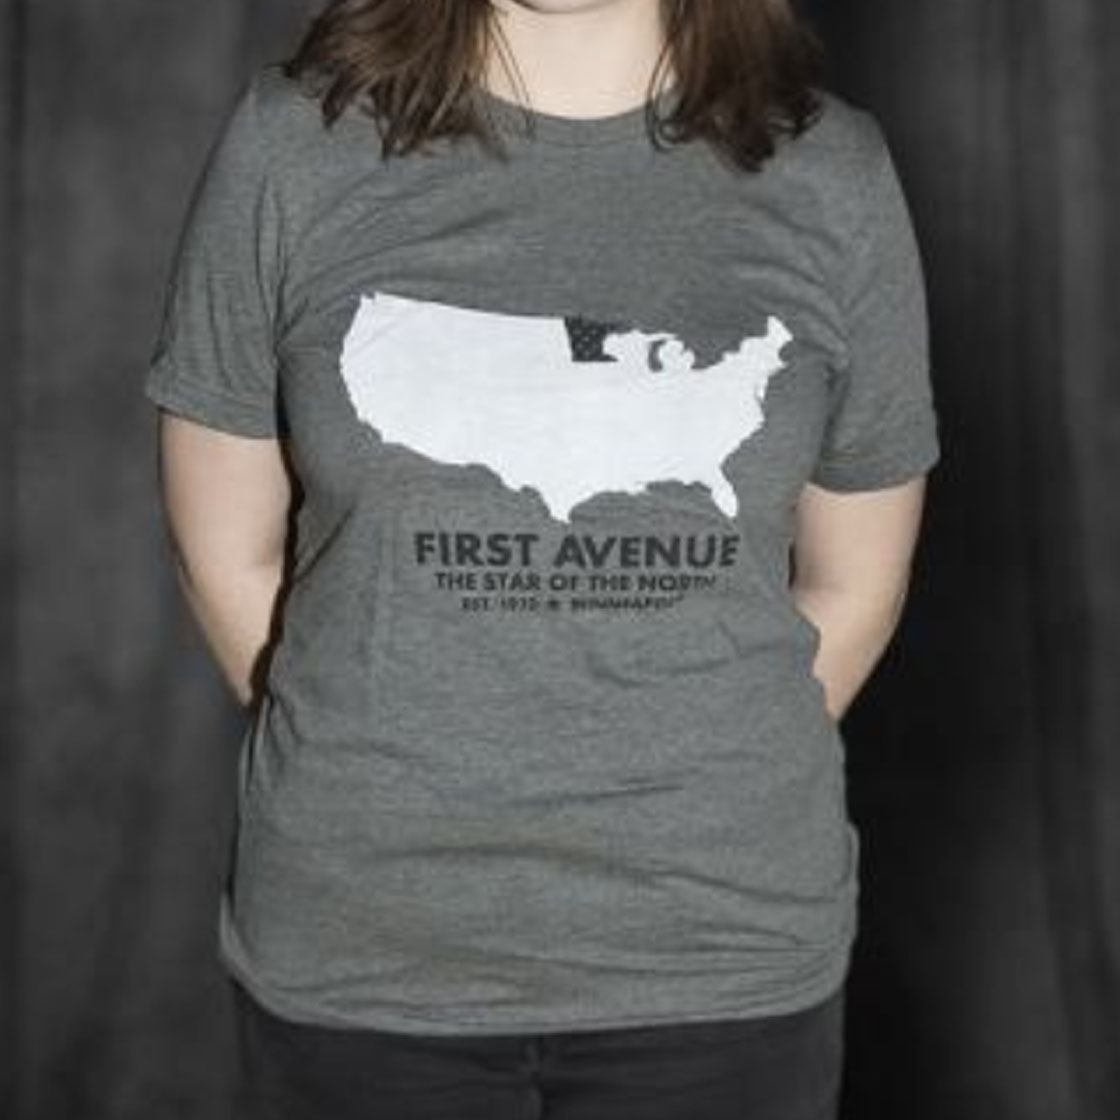 Someone wearing a t shirt with an image of the United States and the words First Avenue